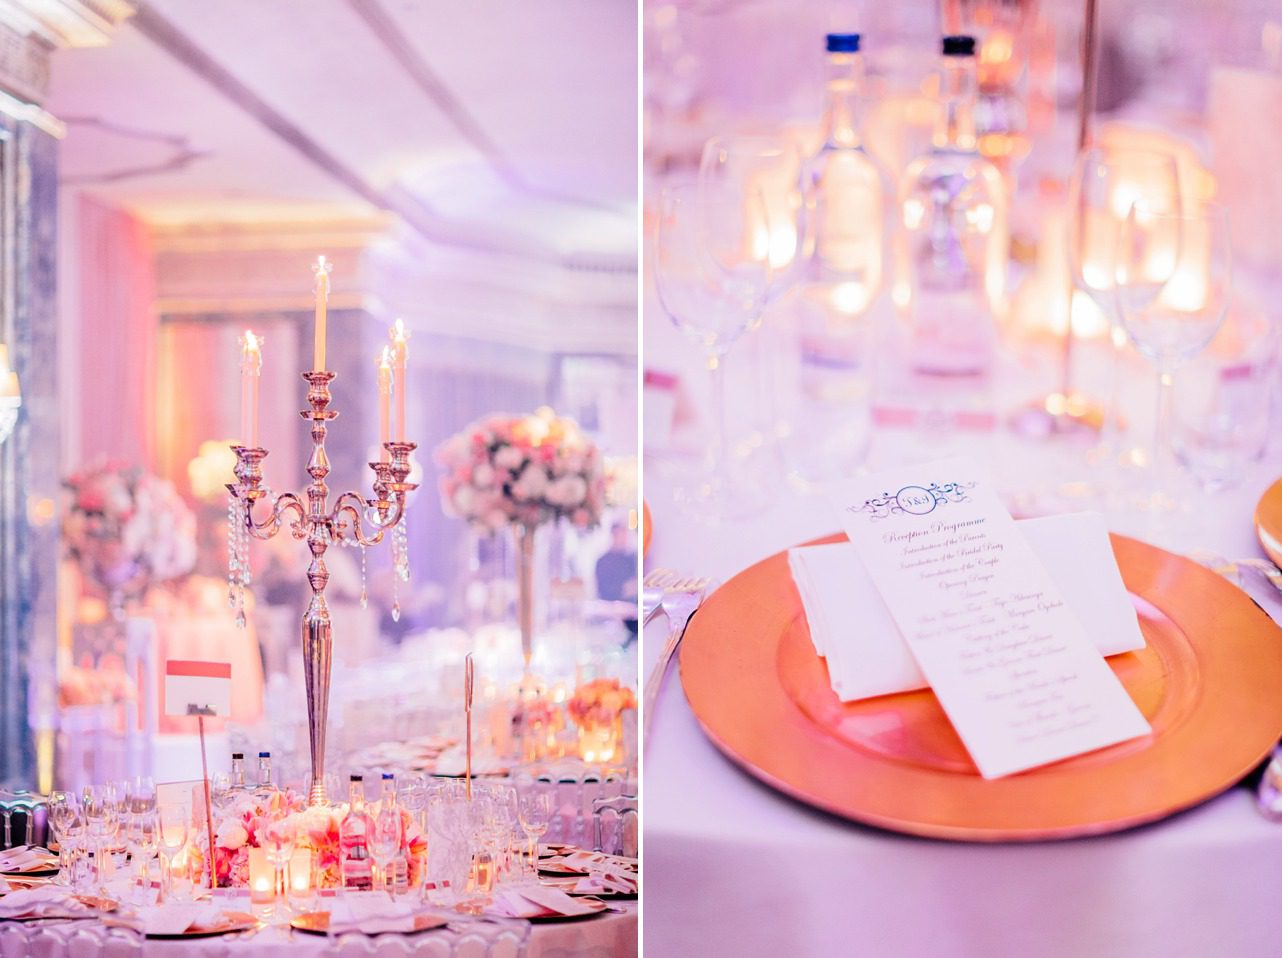 Wedding Details at the Dorchester Hotel in London